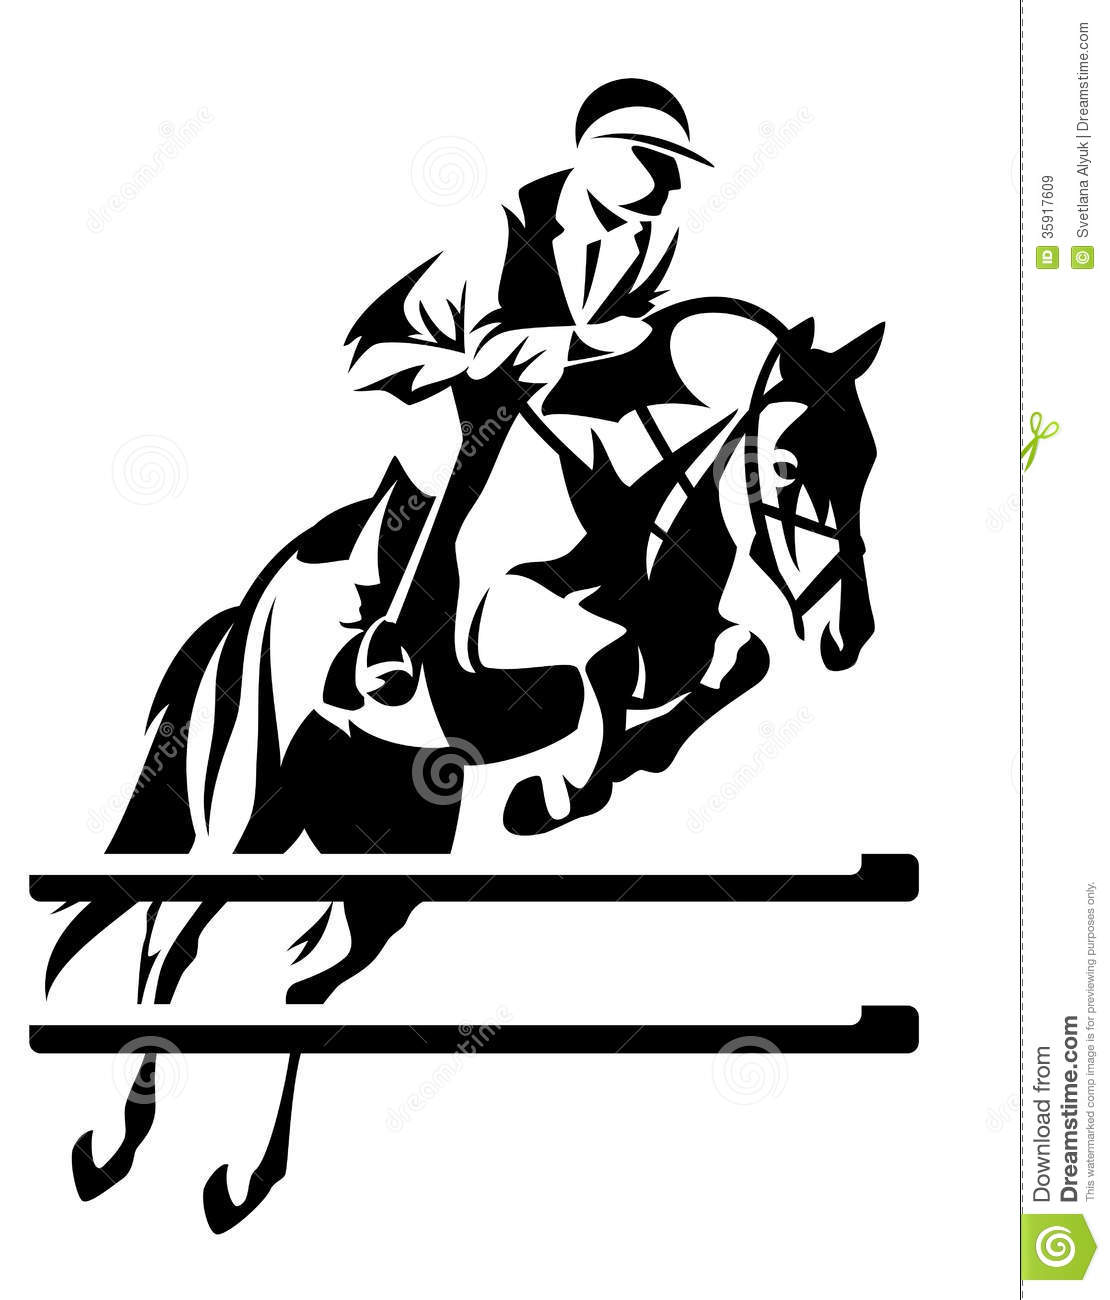 ... Horse Jumping Silhouette 